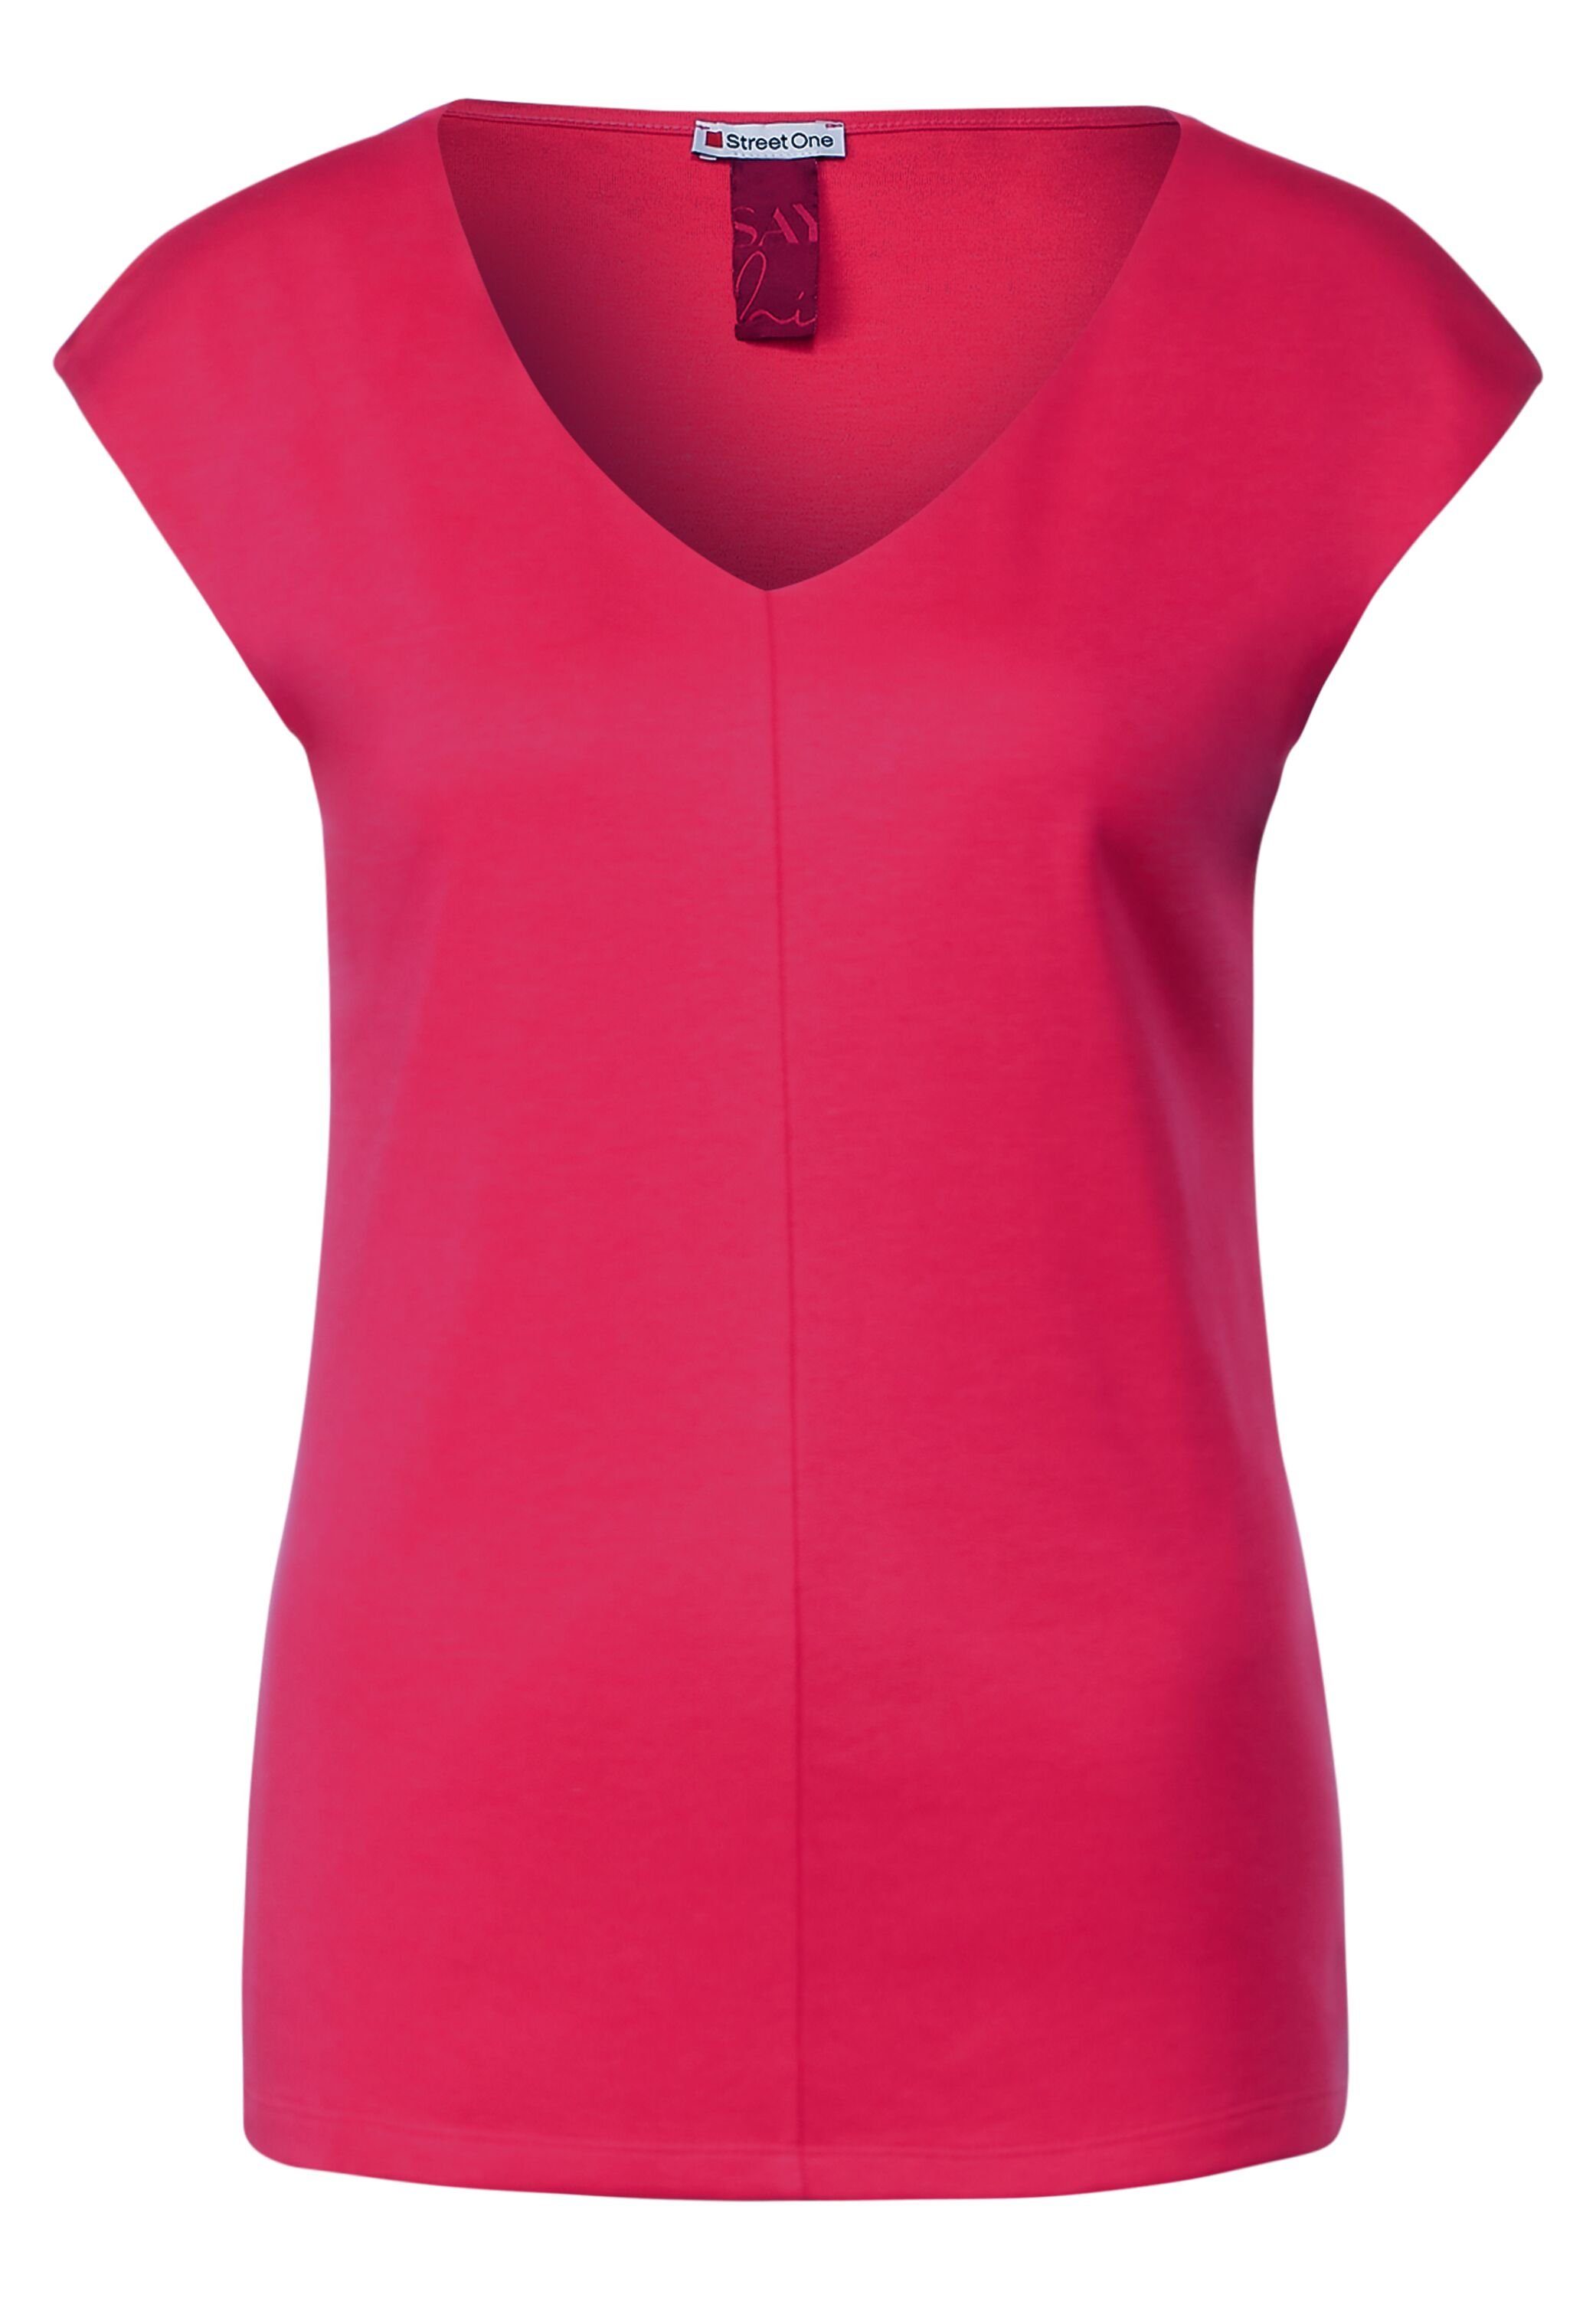 blossom STREET in Unifarbe coral ONE T-Shirt